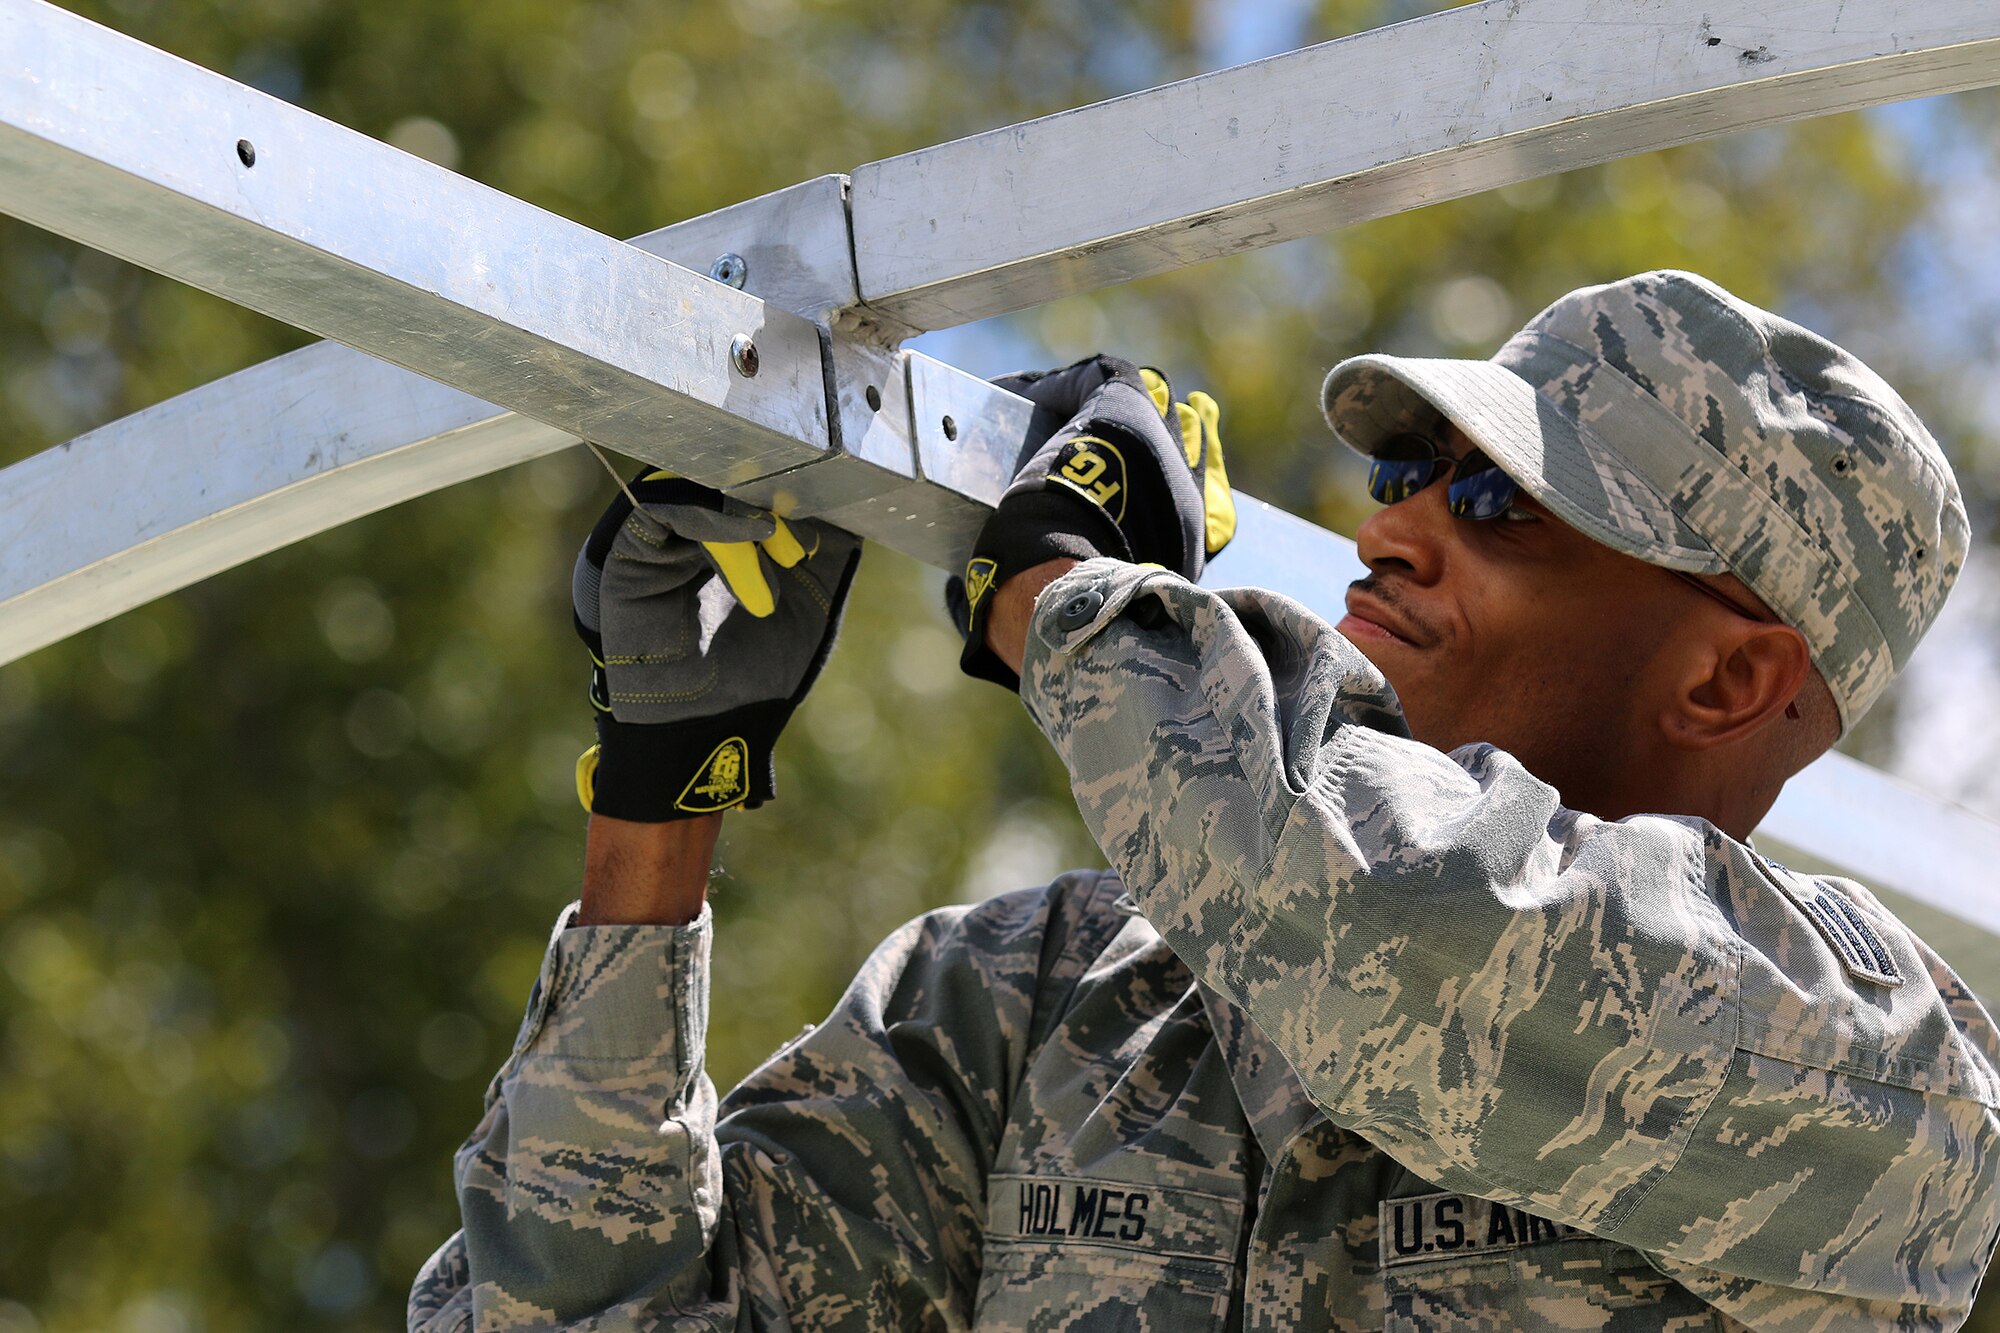 WRIGHT-PATTERSON AIR FORCE BASE, Ohio – Senior Airman Elliott Holmes, 445th Civil Engineer Squadron, works to erect an Alaskan tent during a bivouac training exercise at the Warfighter Training Center Sept. 13, 2015. The Alaskan is one of many types of tents used on deployments. U.S. Air Force photo /Tech. Sgt. Patrick O’Reilly)